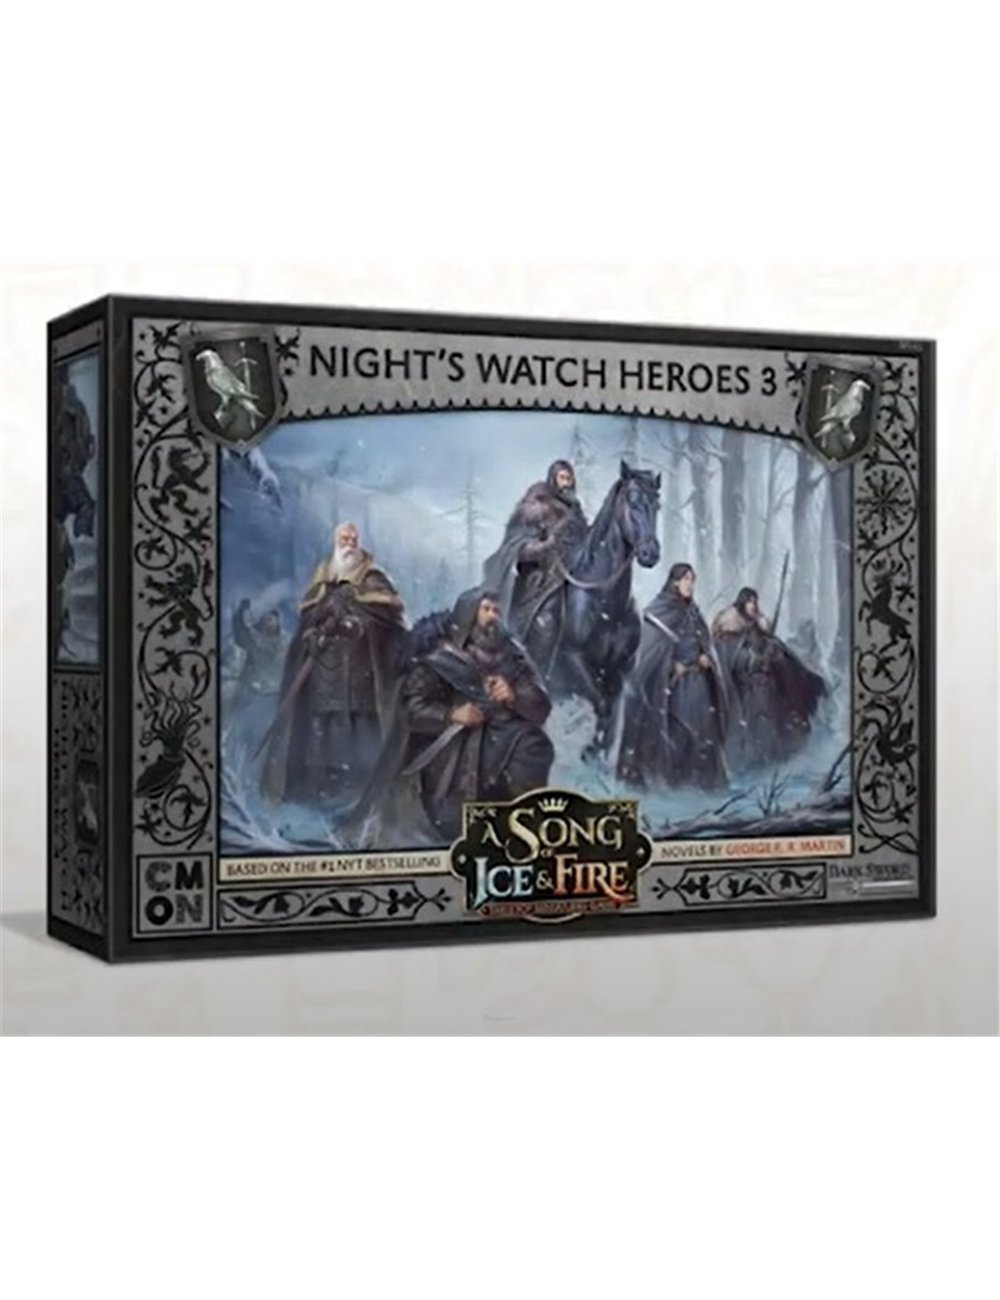 A SONG OF ICE & FIRE - Night's Watch Heroes 3